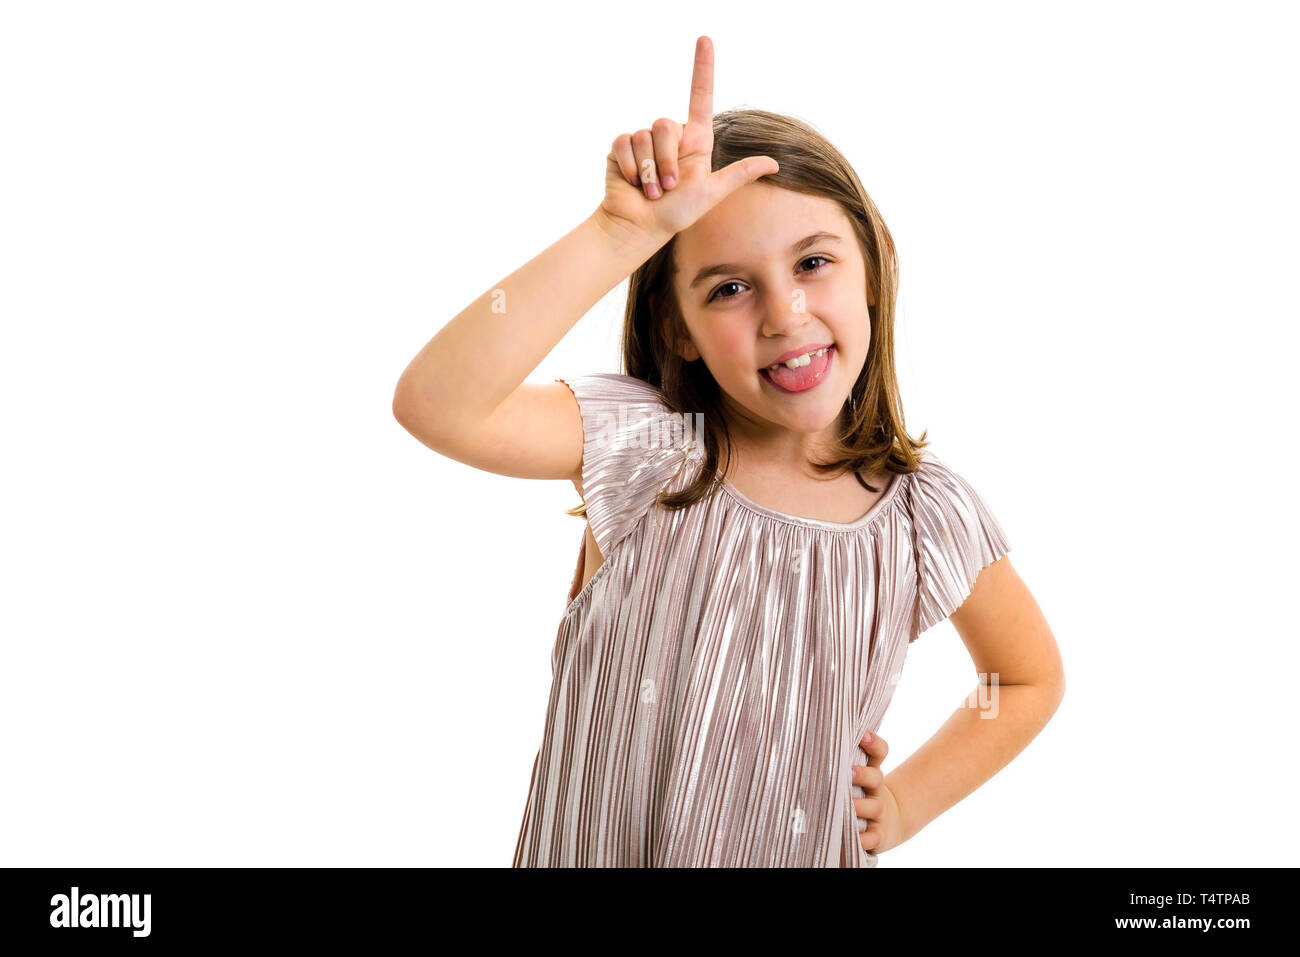 Portrait of happy girl making loser hand gesture at camera. Portrait of a cheerful cute little child girl looking at the camera, smiling showing L sig Stock Photo